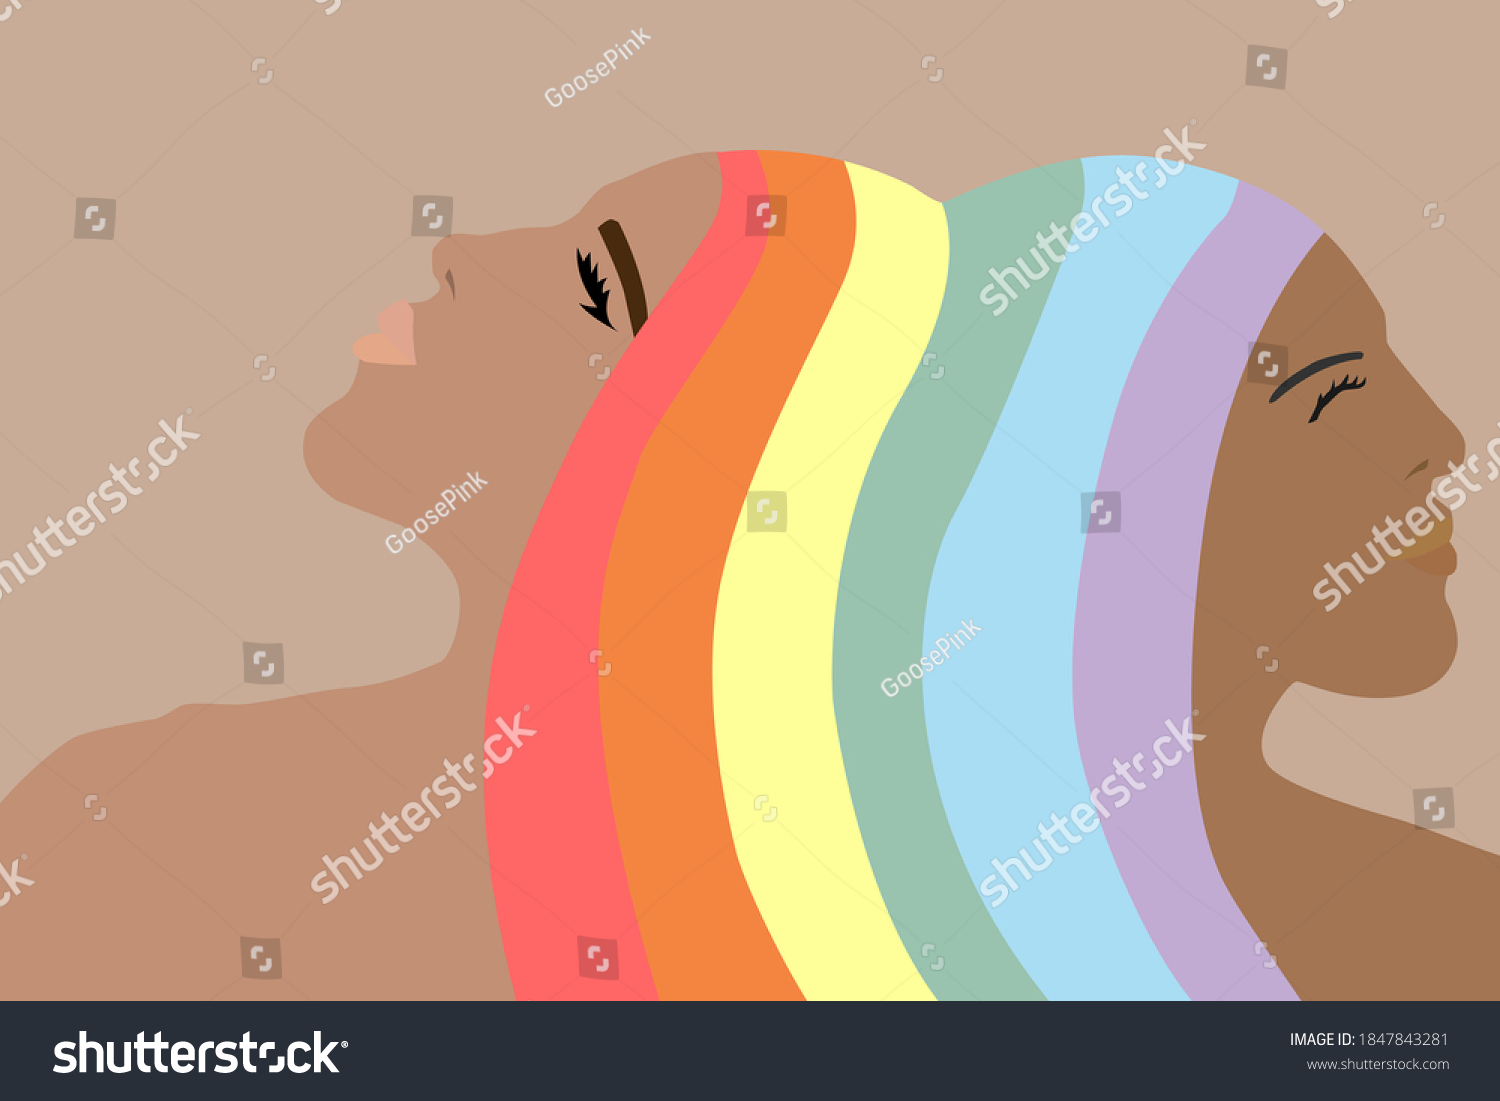 Lgbt Two Lesbian Girls Hair Colors Stock Vector Royalty Free 1847843281 Shutterstock